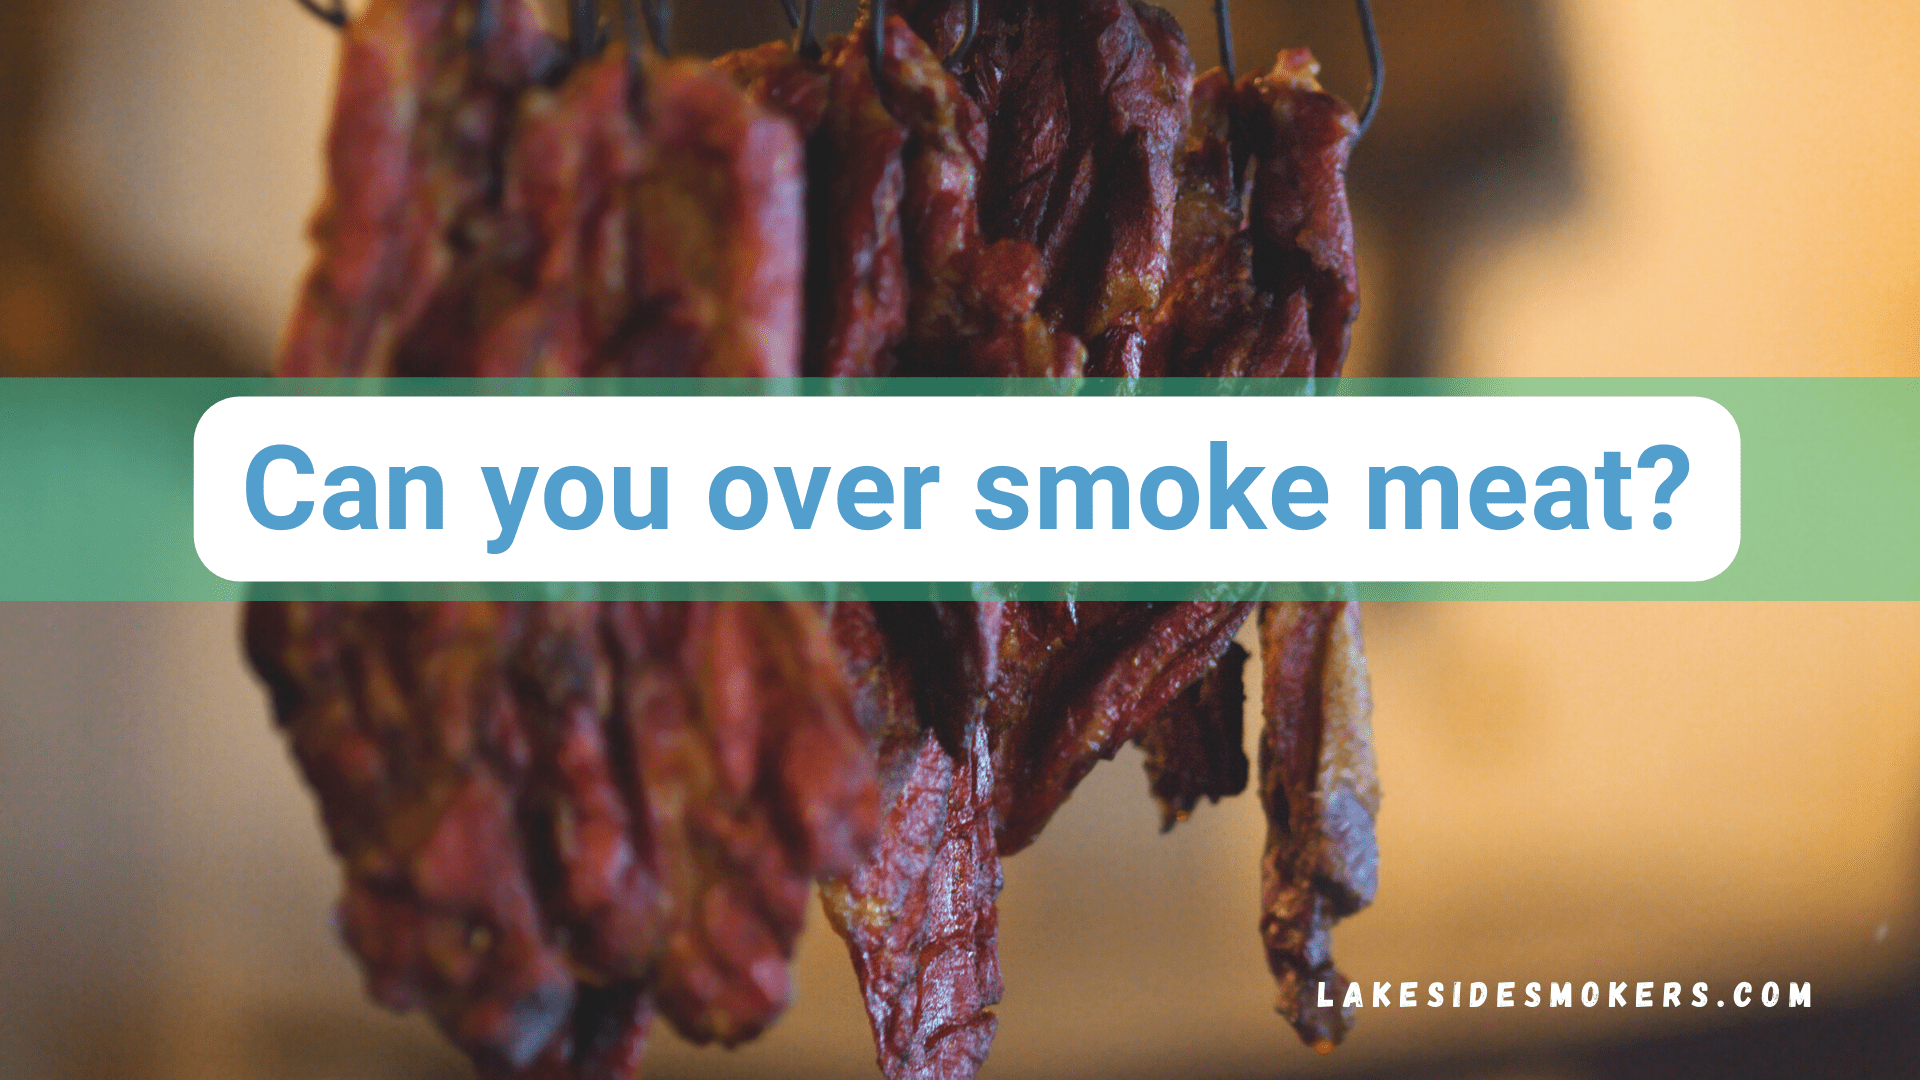 Can you over smoke meat? A common mistake, here's how to avoid it